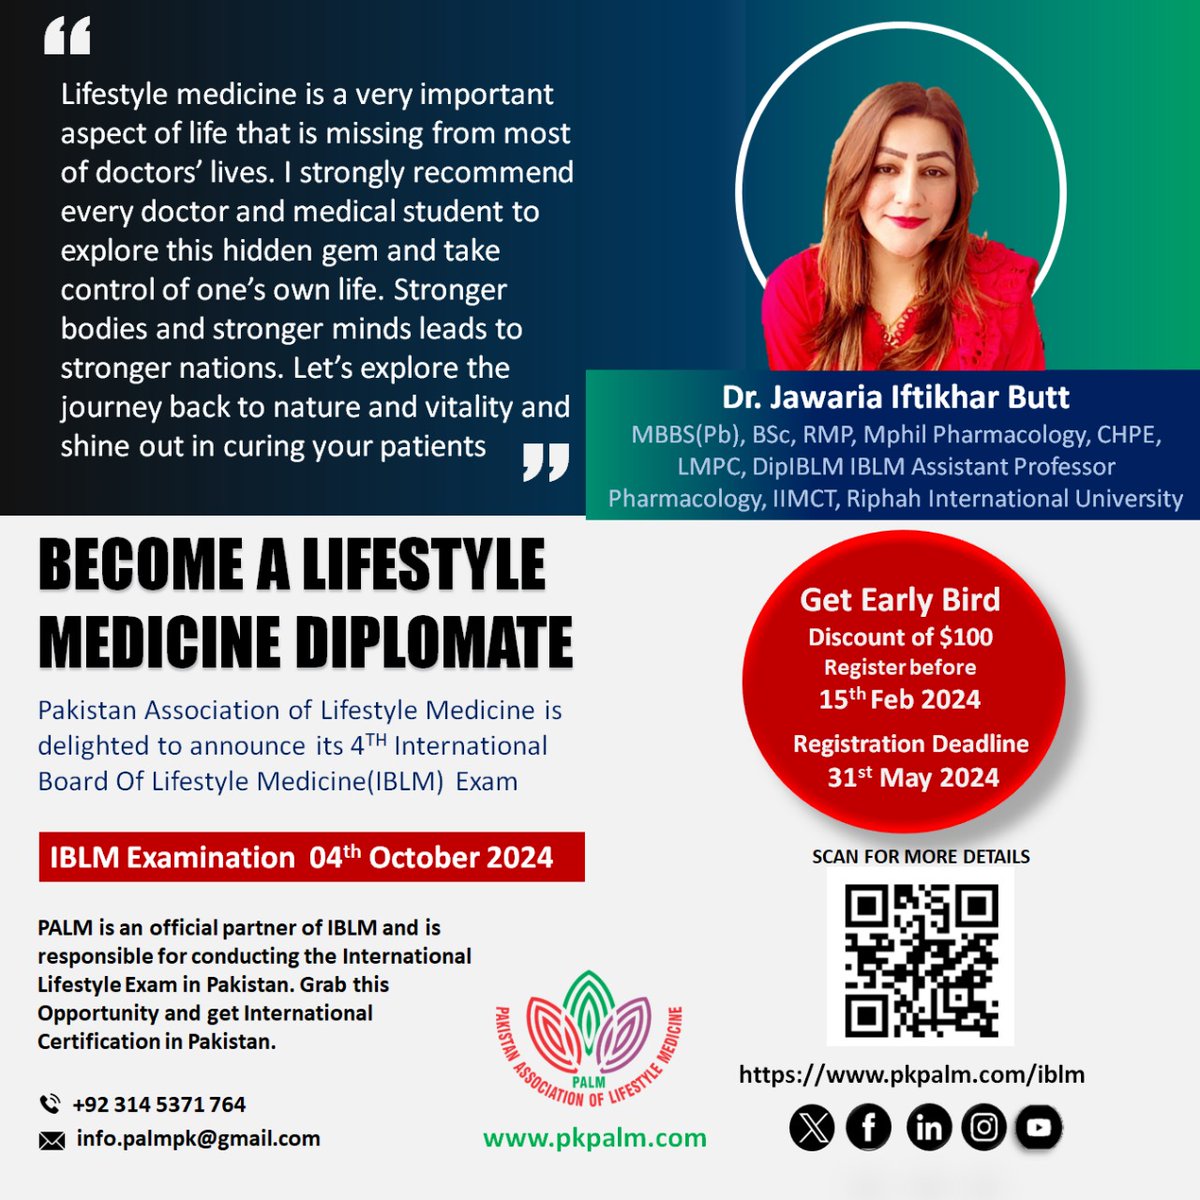 Become a Lifestyle Medicine Diplomate. Great opportunity for Medical Doctors and Allied Health Professionals. For more details please visit pkpalm.com/iblm